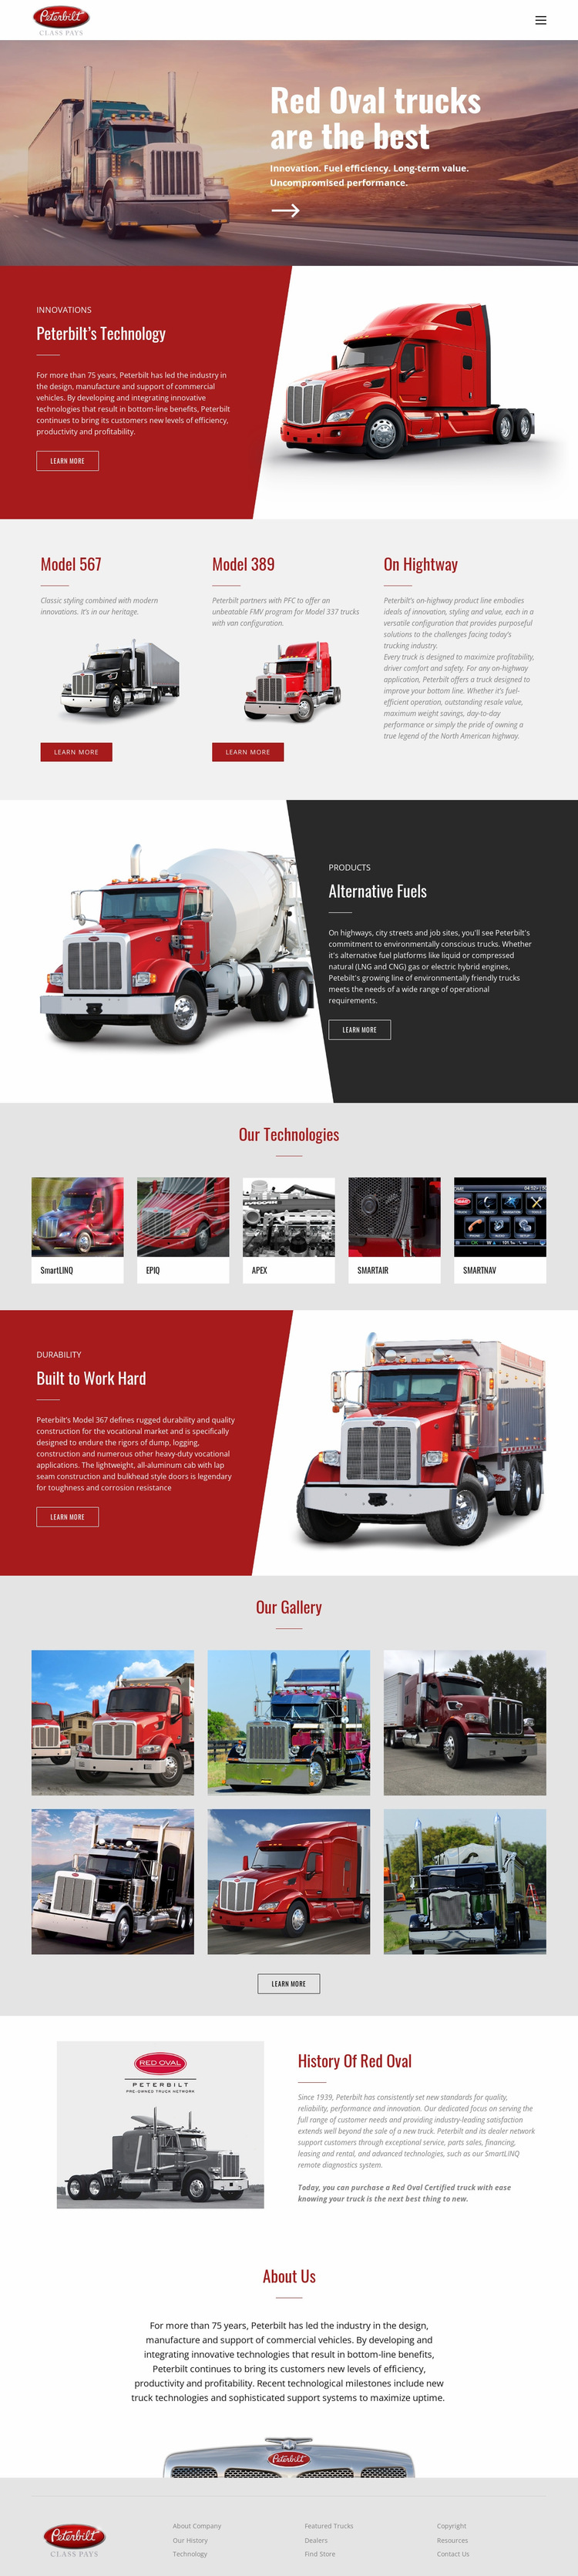 Red oval truck transportaion Website Builder Templates